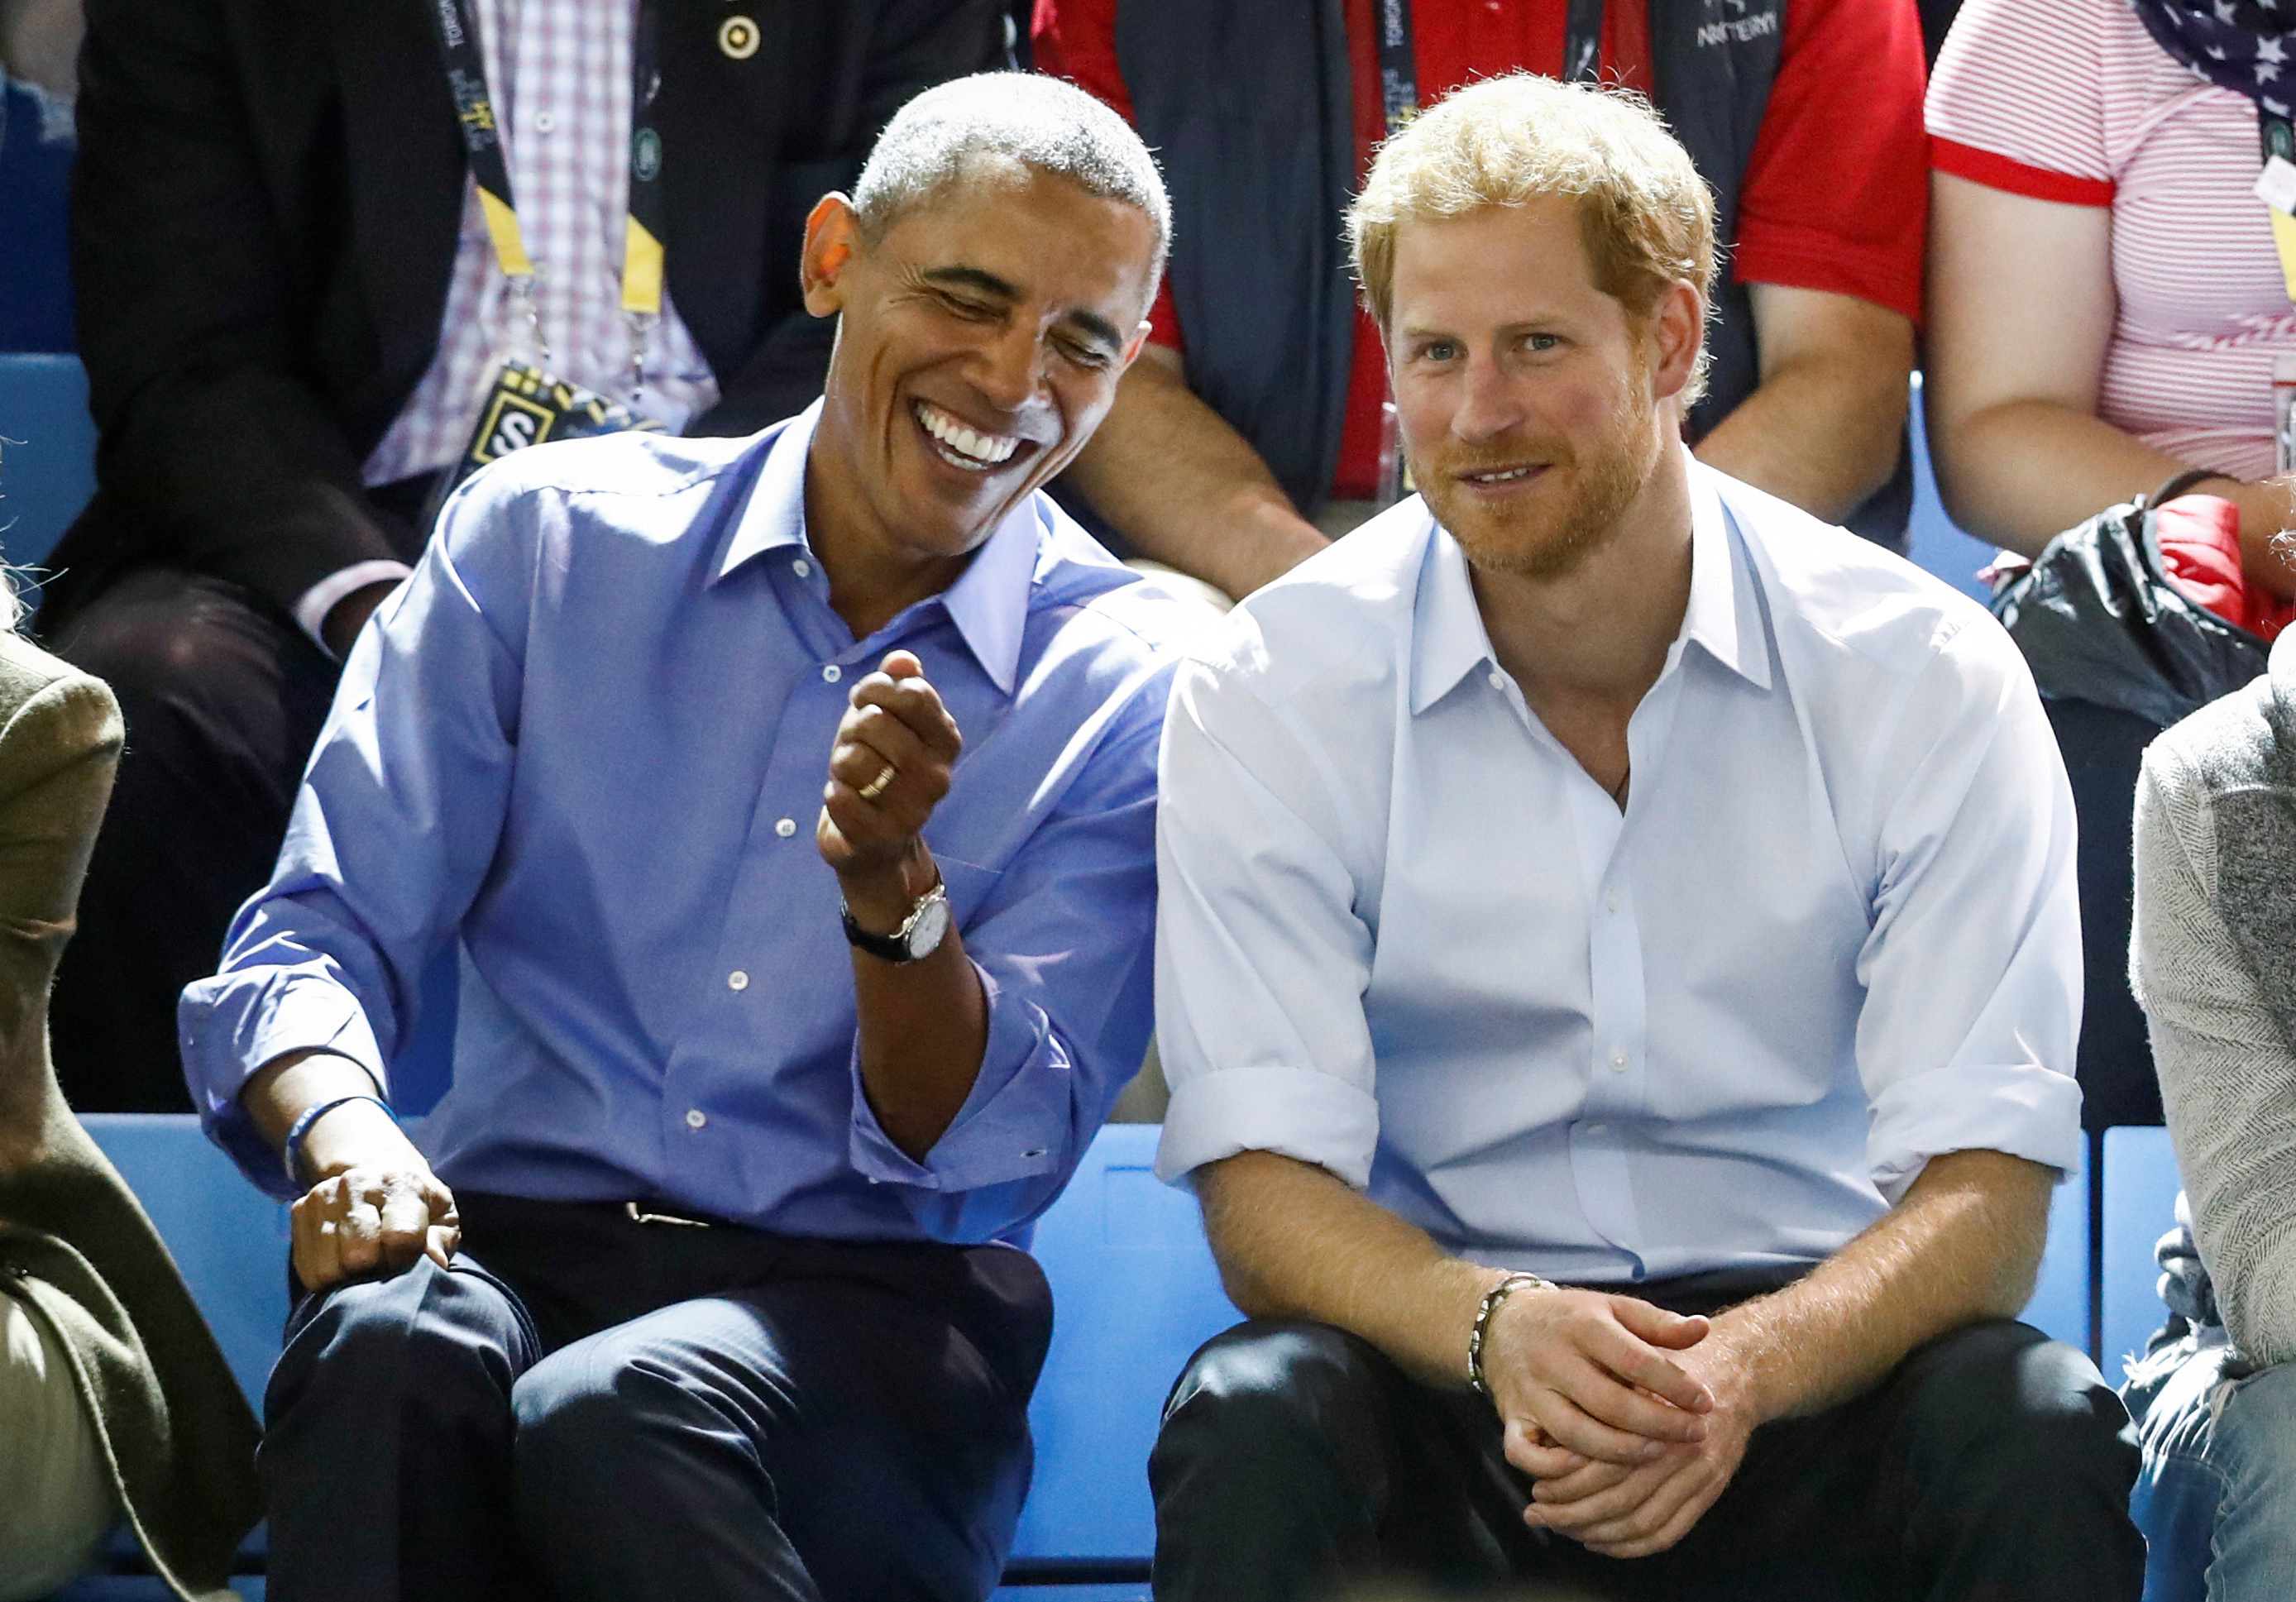 Prince Harry and former President Obama laugh together